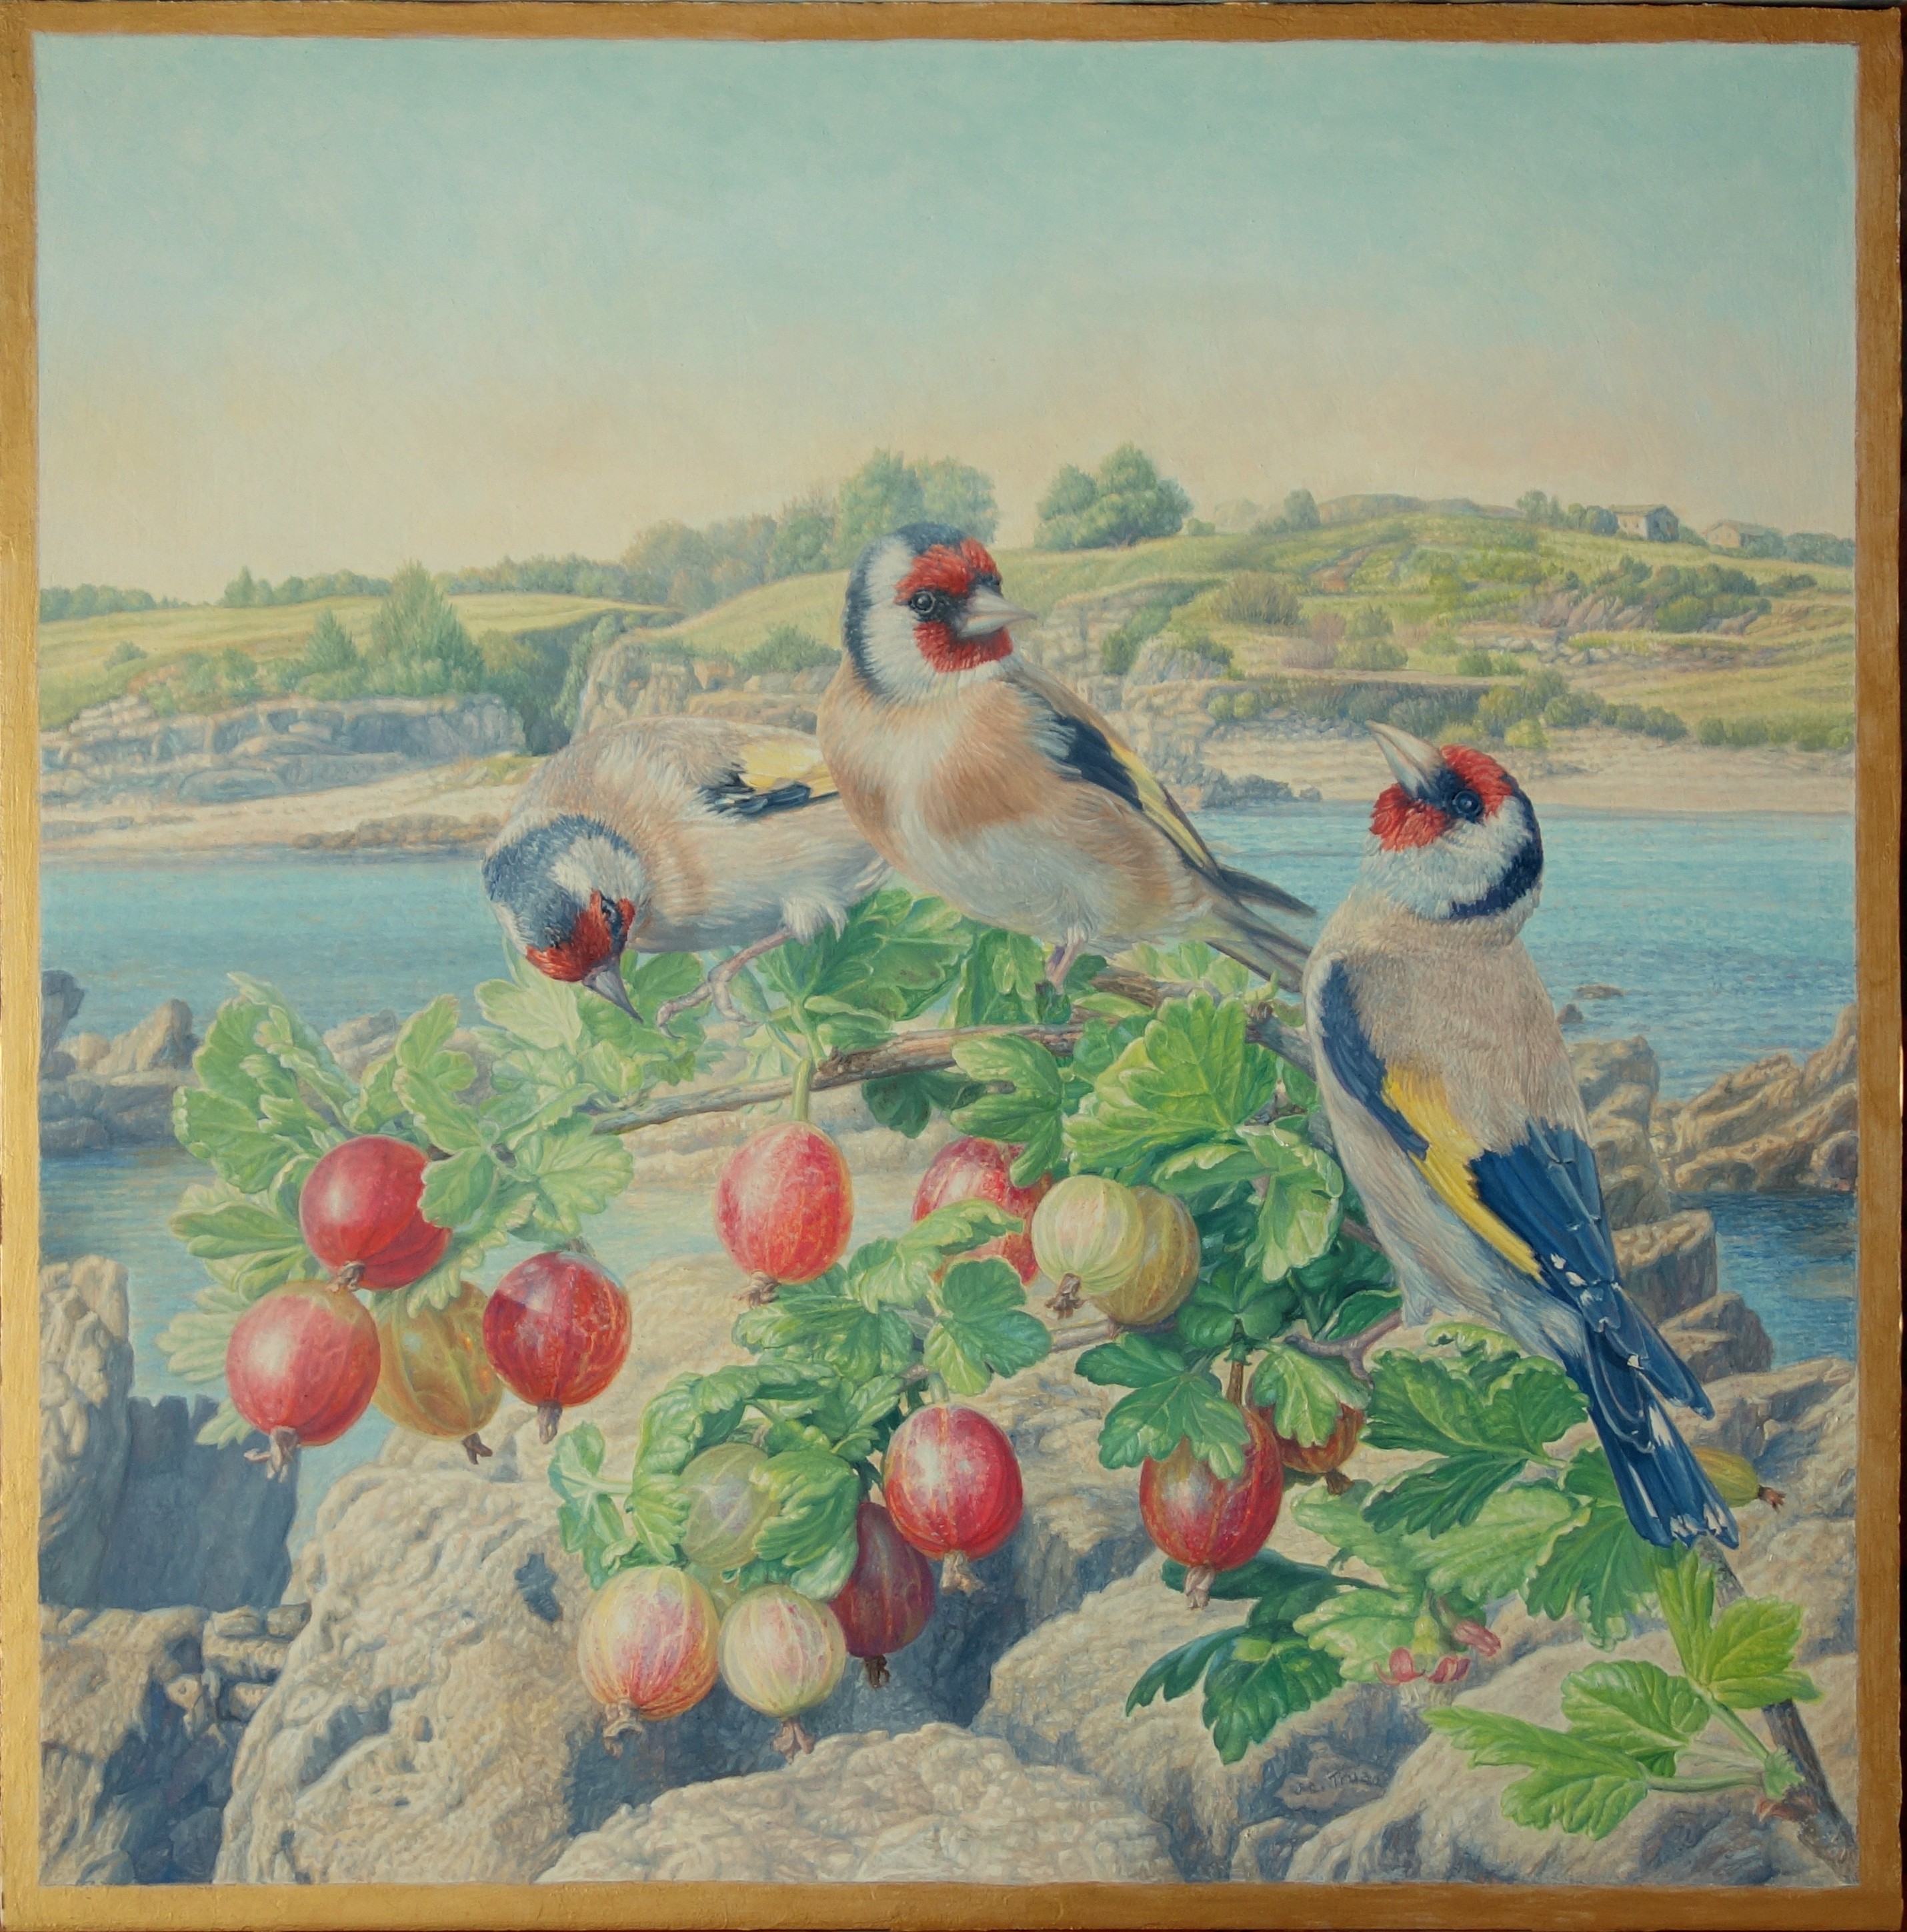 Goldfinches and gooseberries on the beach,2016 | oil on wood, 16.5x16.5in.